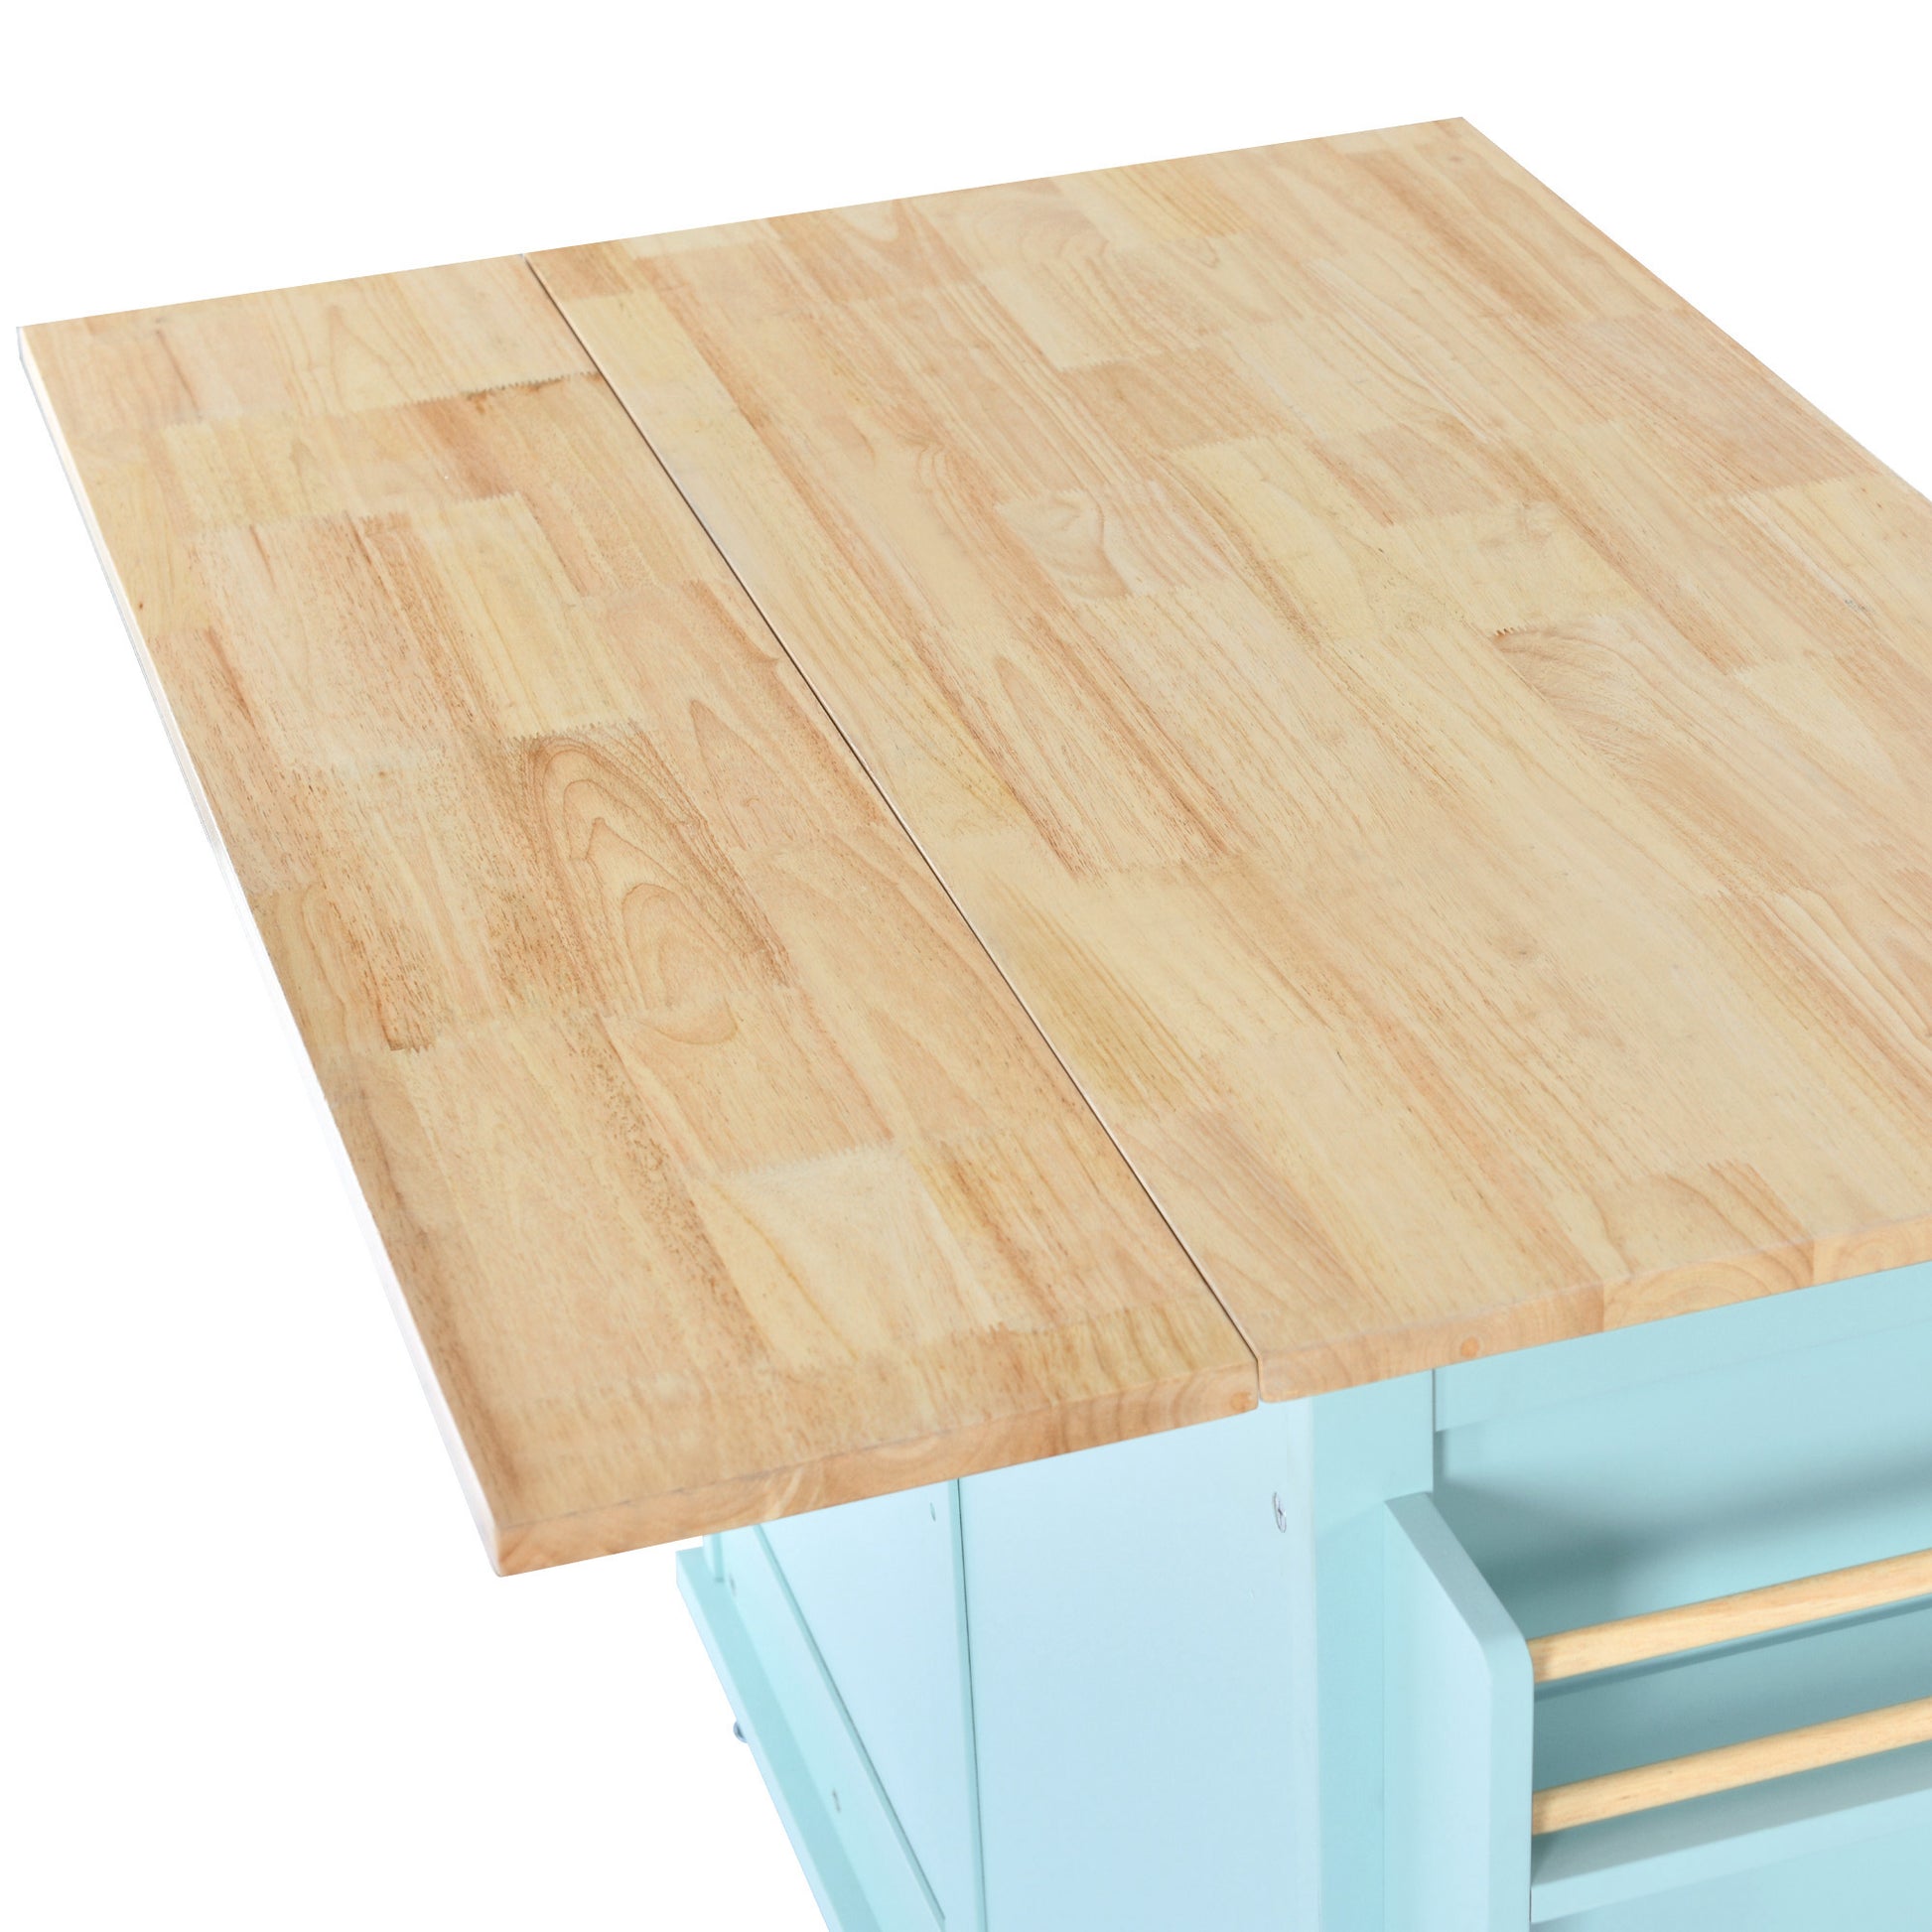 K&K Mobile Kitchen Island Cart with Solid Wood Top- Mint Green